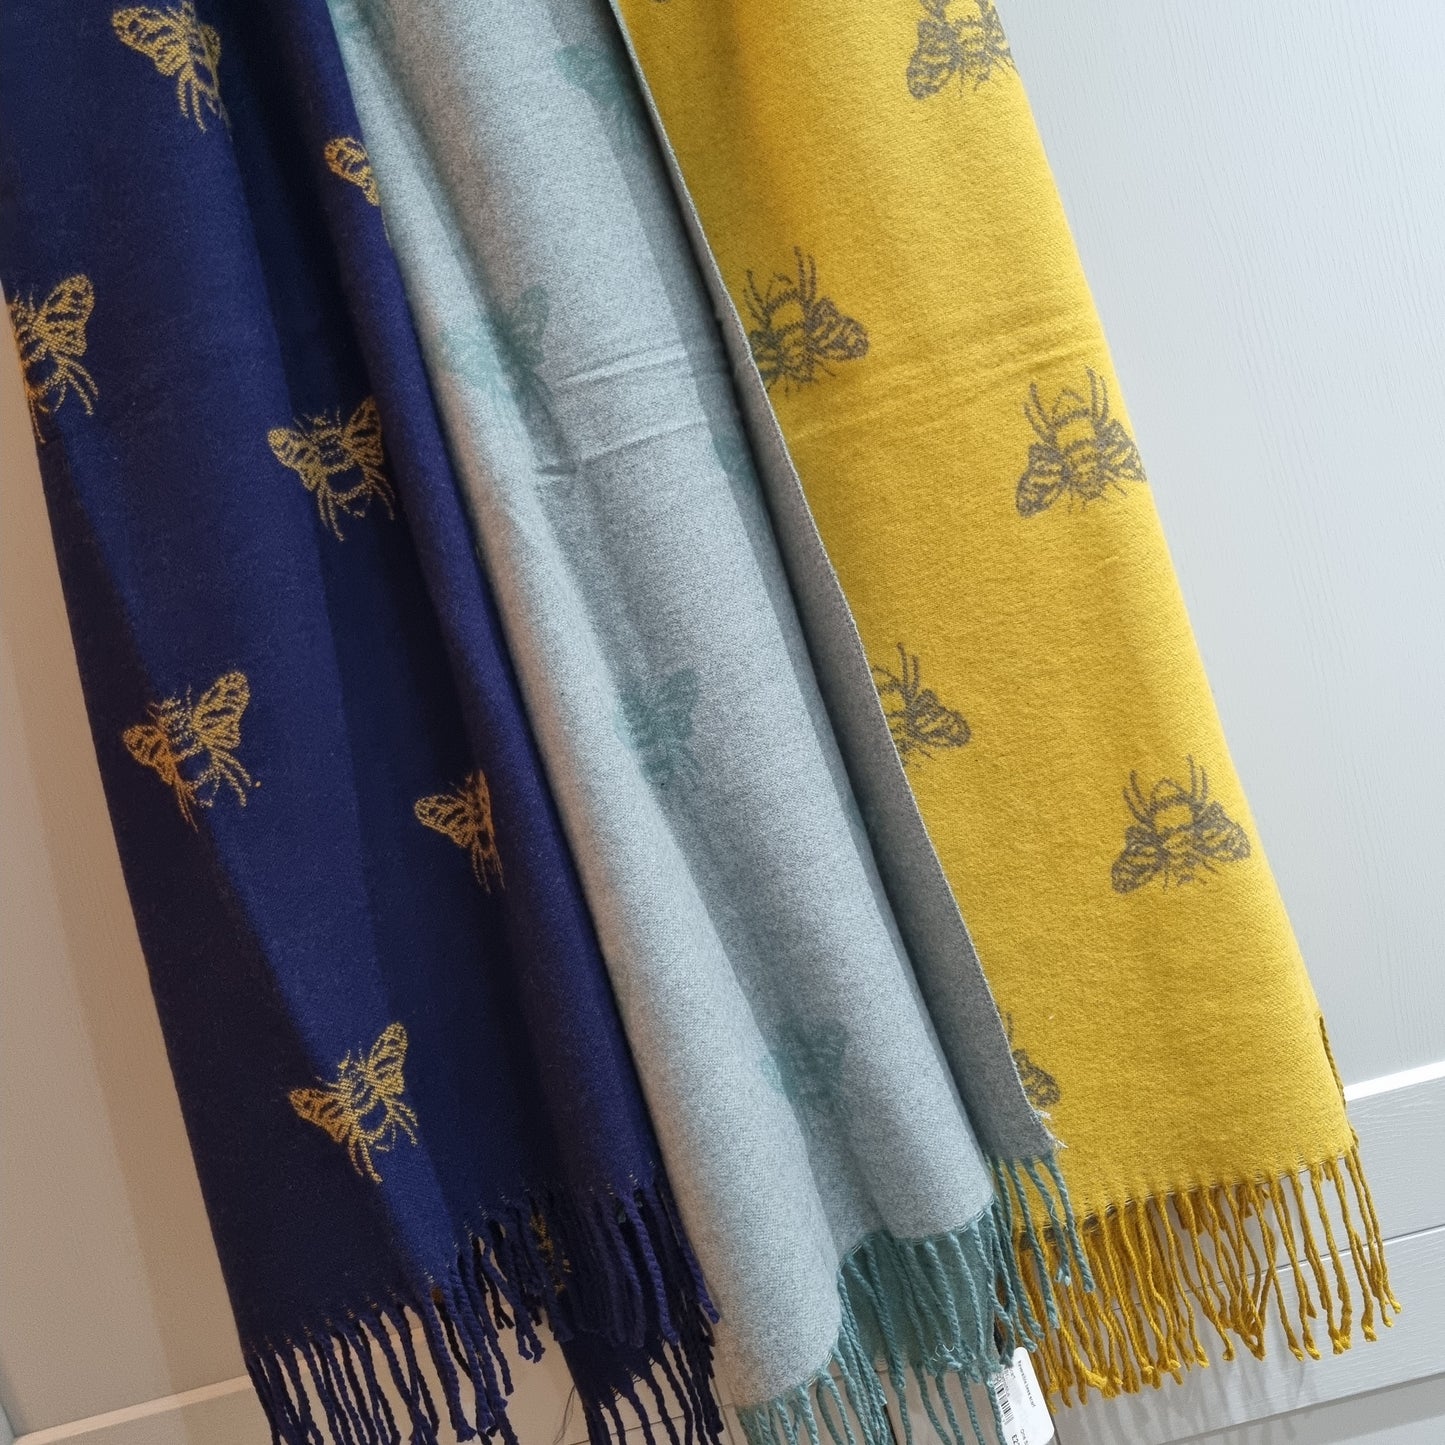 Reversible bees scarf